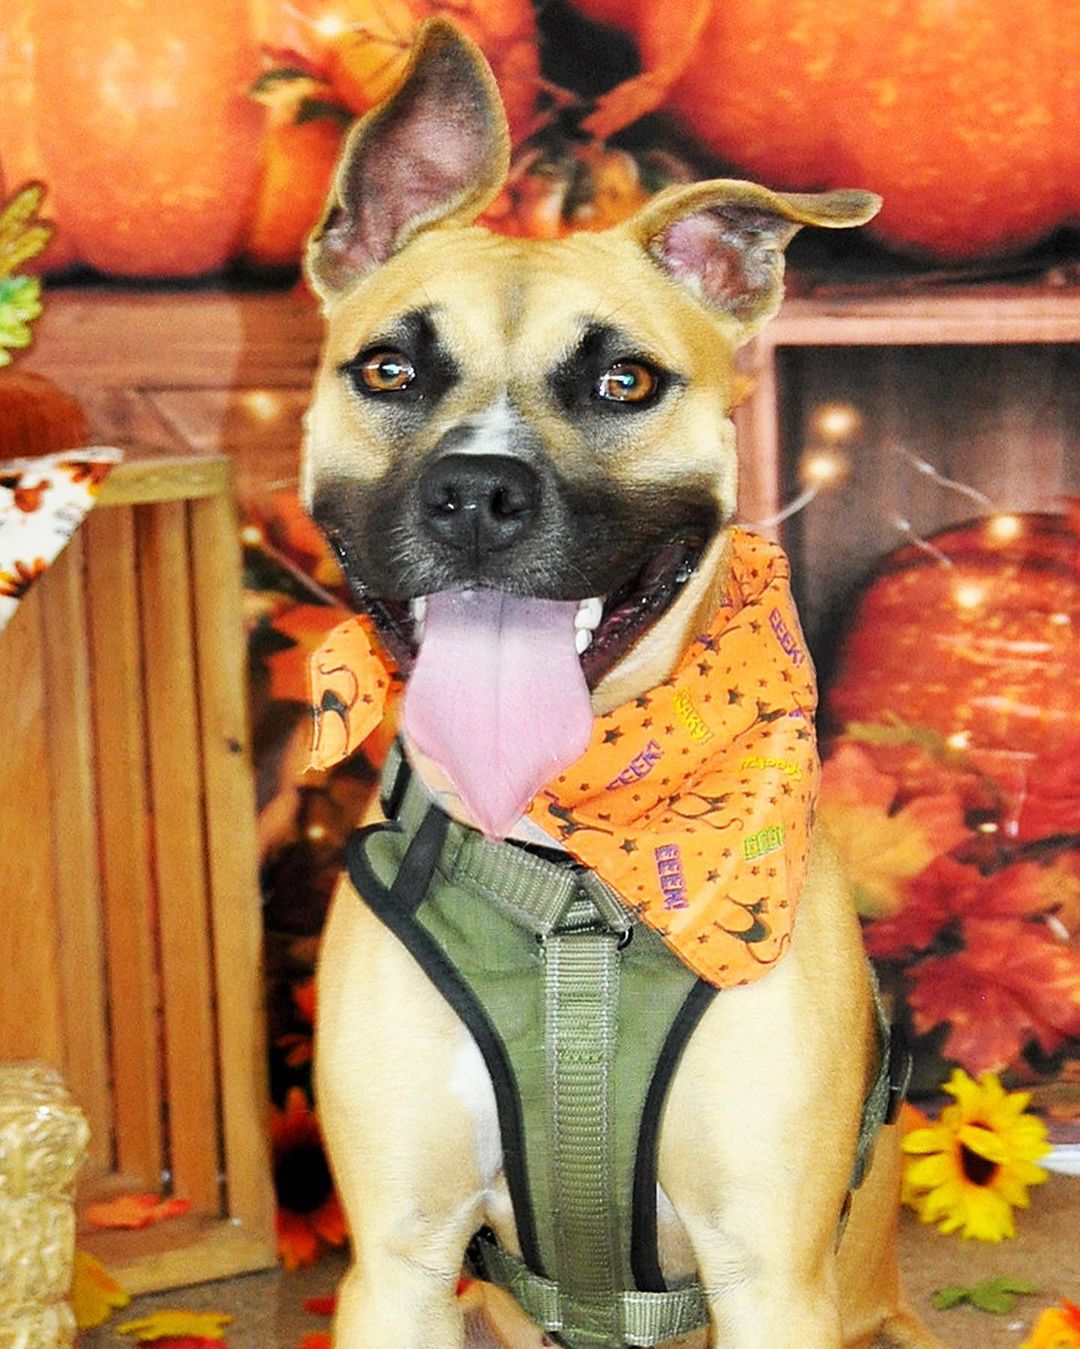 Happy Thanksgiving!🍁🐶🙏
These wagging tails would love to break bread with a family around the table. To adopt a pet, visit abandonedpetrescue.org

Thank you Cheryl D Photography for the beautiful photos of our adoptable dogs. 

<a target='_blank' href='https://www.instagram.com/explore/tags/loveisguaranteed/'>#loveisguaranteed</a> <a target='_blank' href='https://www.instagram.com/explore/tags/adopt/'>#adopt</a> <a target='_blank' href='https://www.instagram.com/explore/tags/homefortheholidays/'>#homefortheholidays</a> <a target='_blank' href='https://www.instagram.com/explore/tags/abandonedpetrescue/'>#abandonedpetrescue</a> <a target='_blank' href='https://www.instagram.com/explore/tags/animalrescue/'>#animalrescue</a>